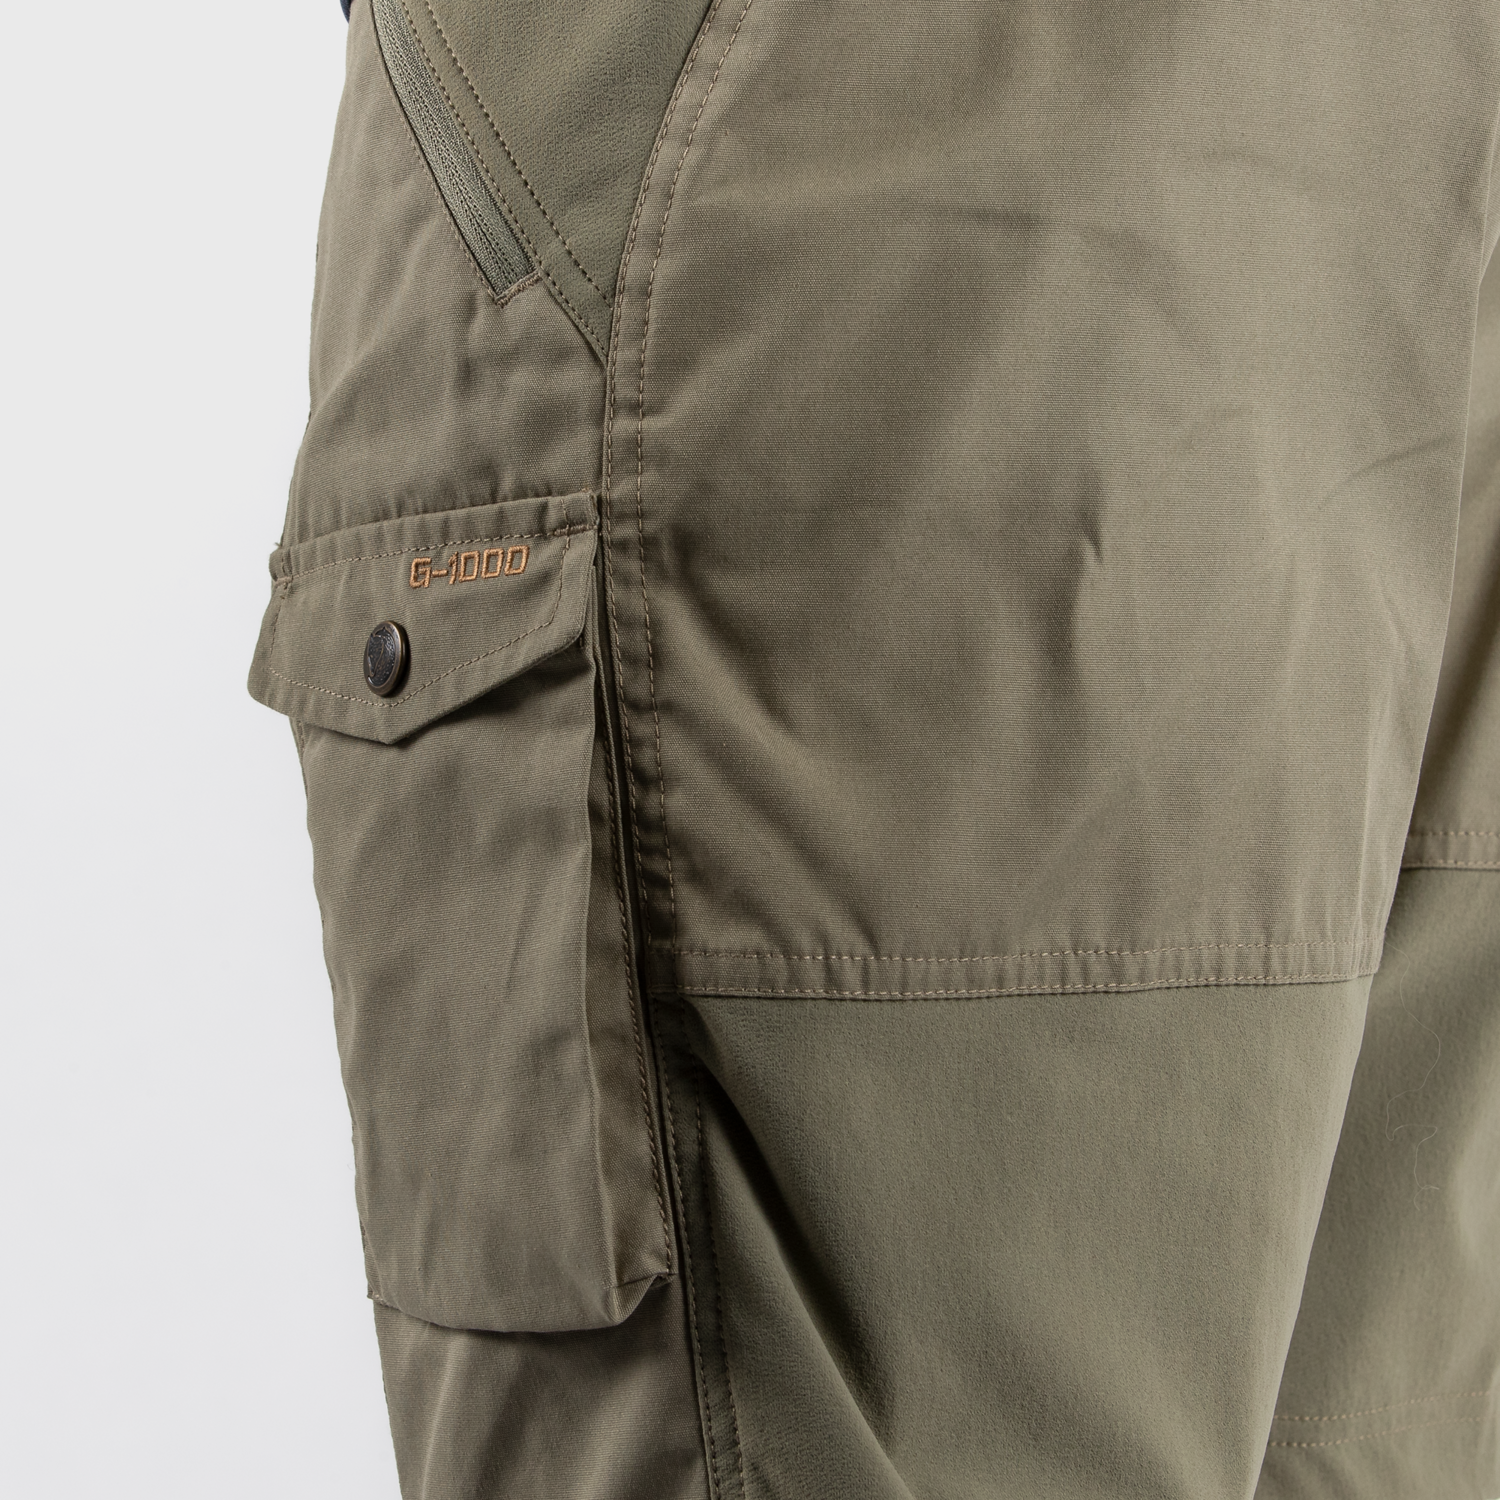 light olive branded premium men's shorts/trousers with leather fox logo and stylish pockets.